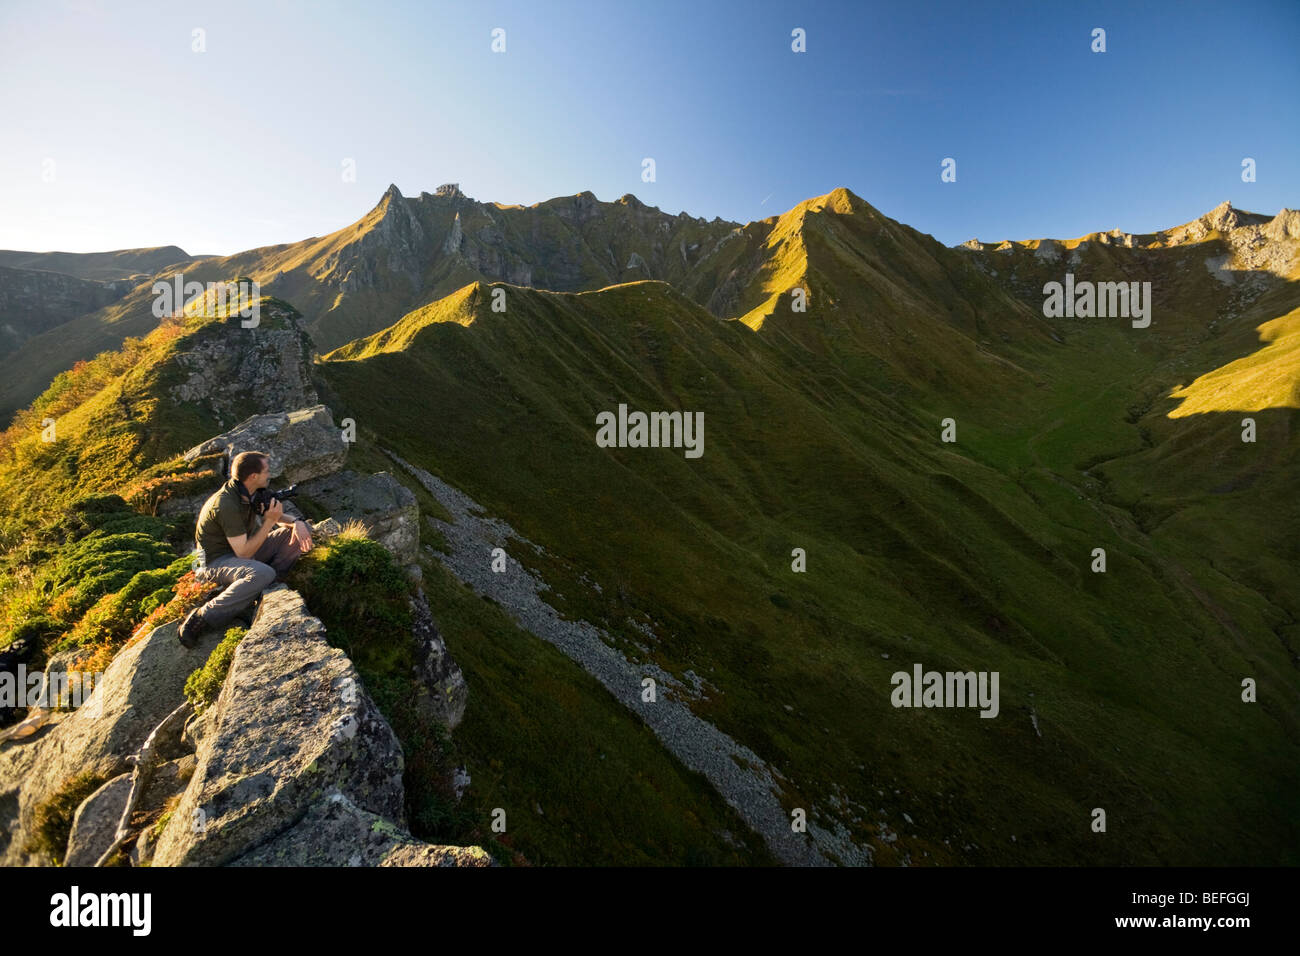 Early in the morning, a photographer gazing at the "Val de Courre" (Auvergne). Photographe admirant le Val de Courre au matin. Stock Photo